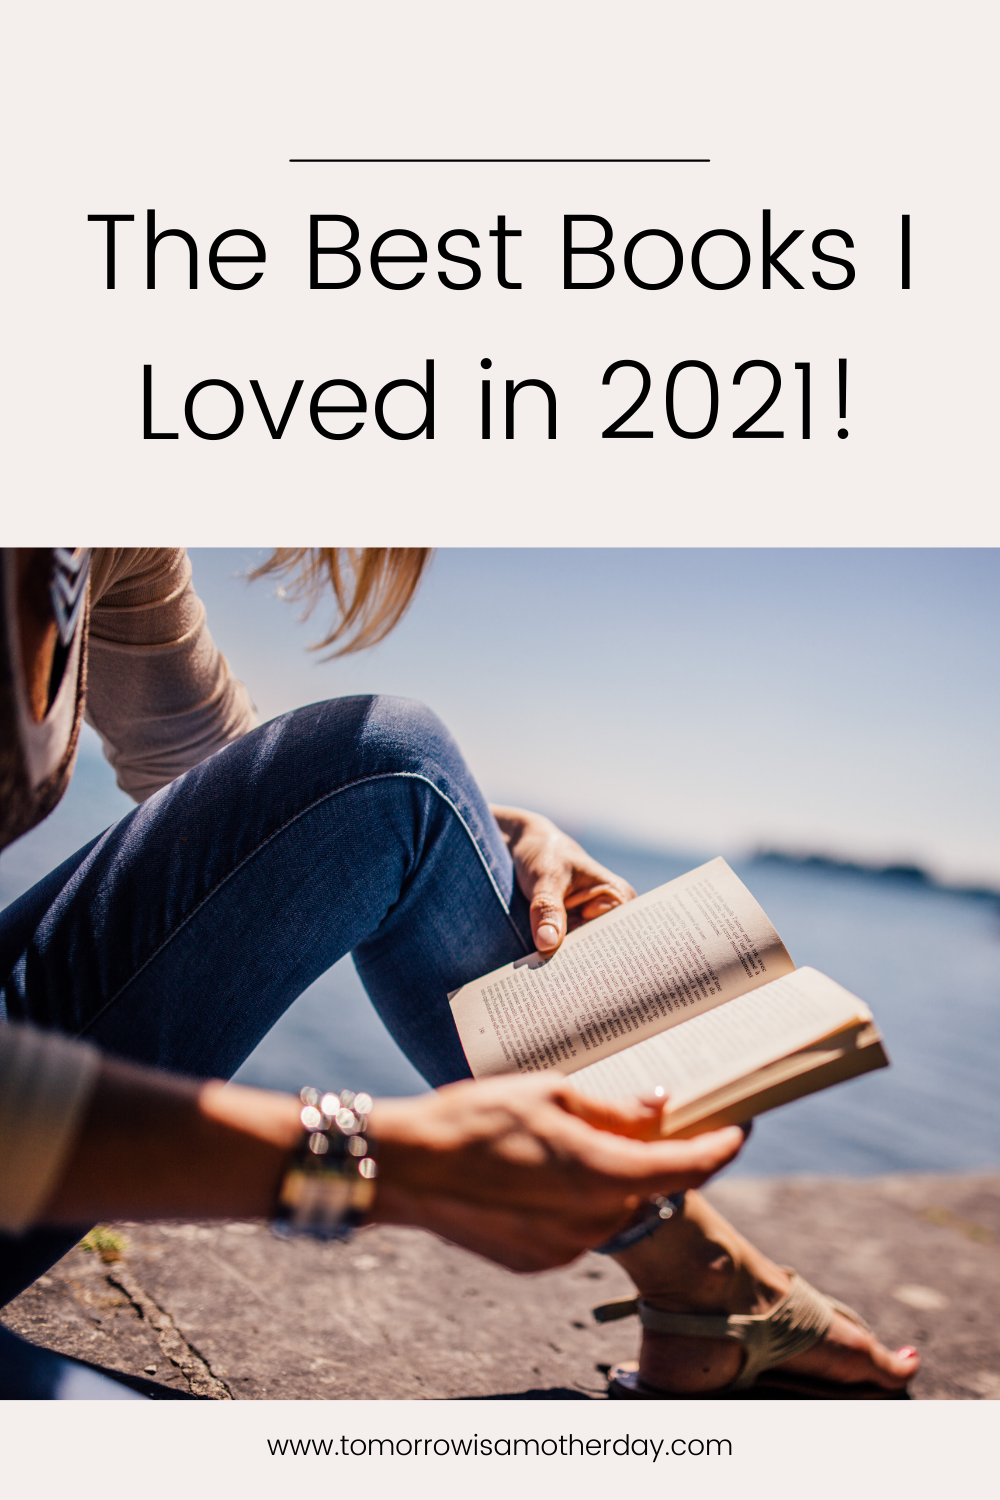 The Best Books I Loved in 2021